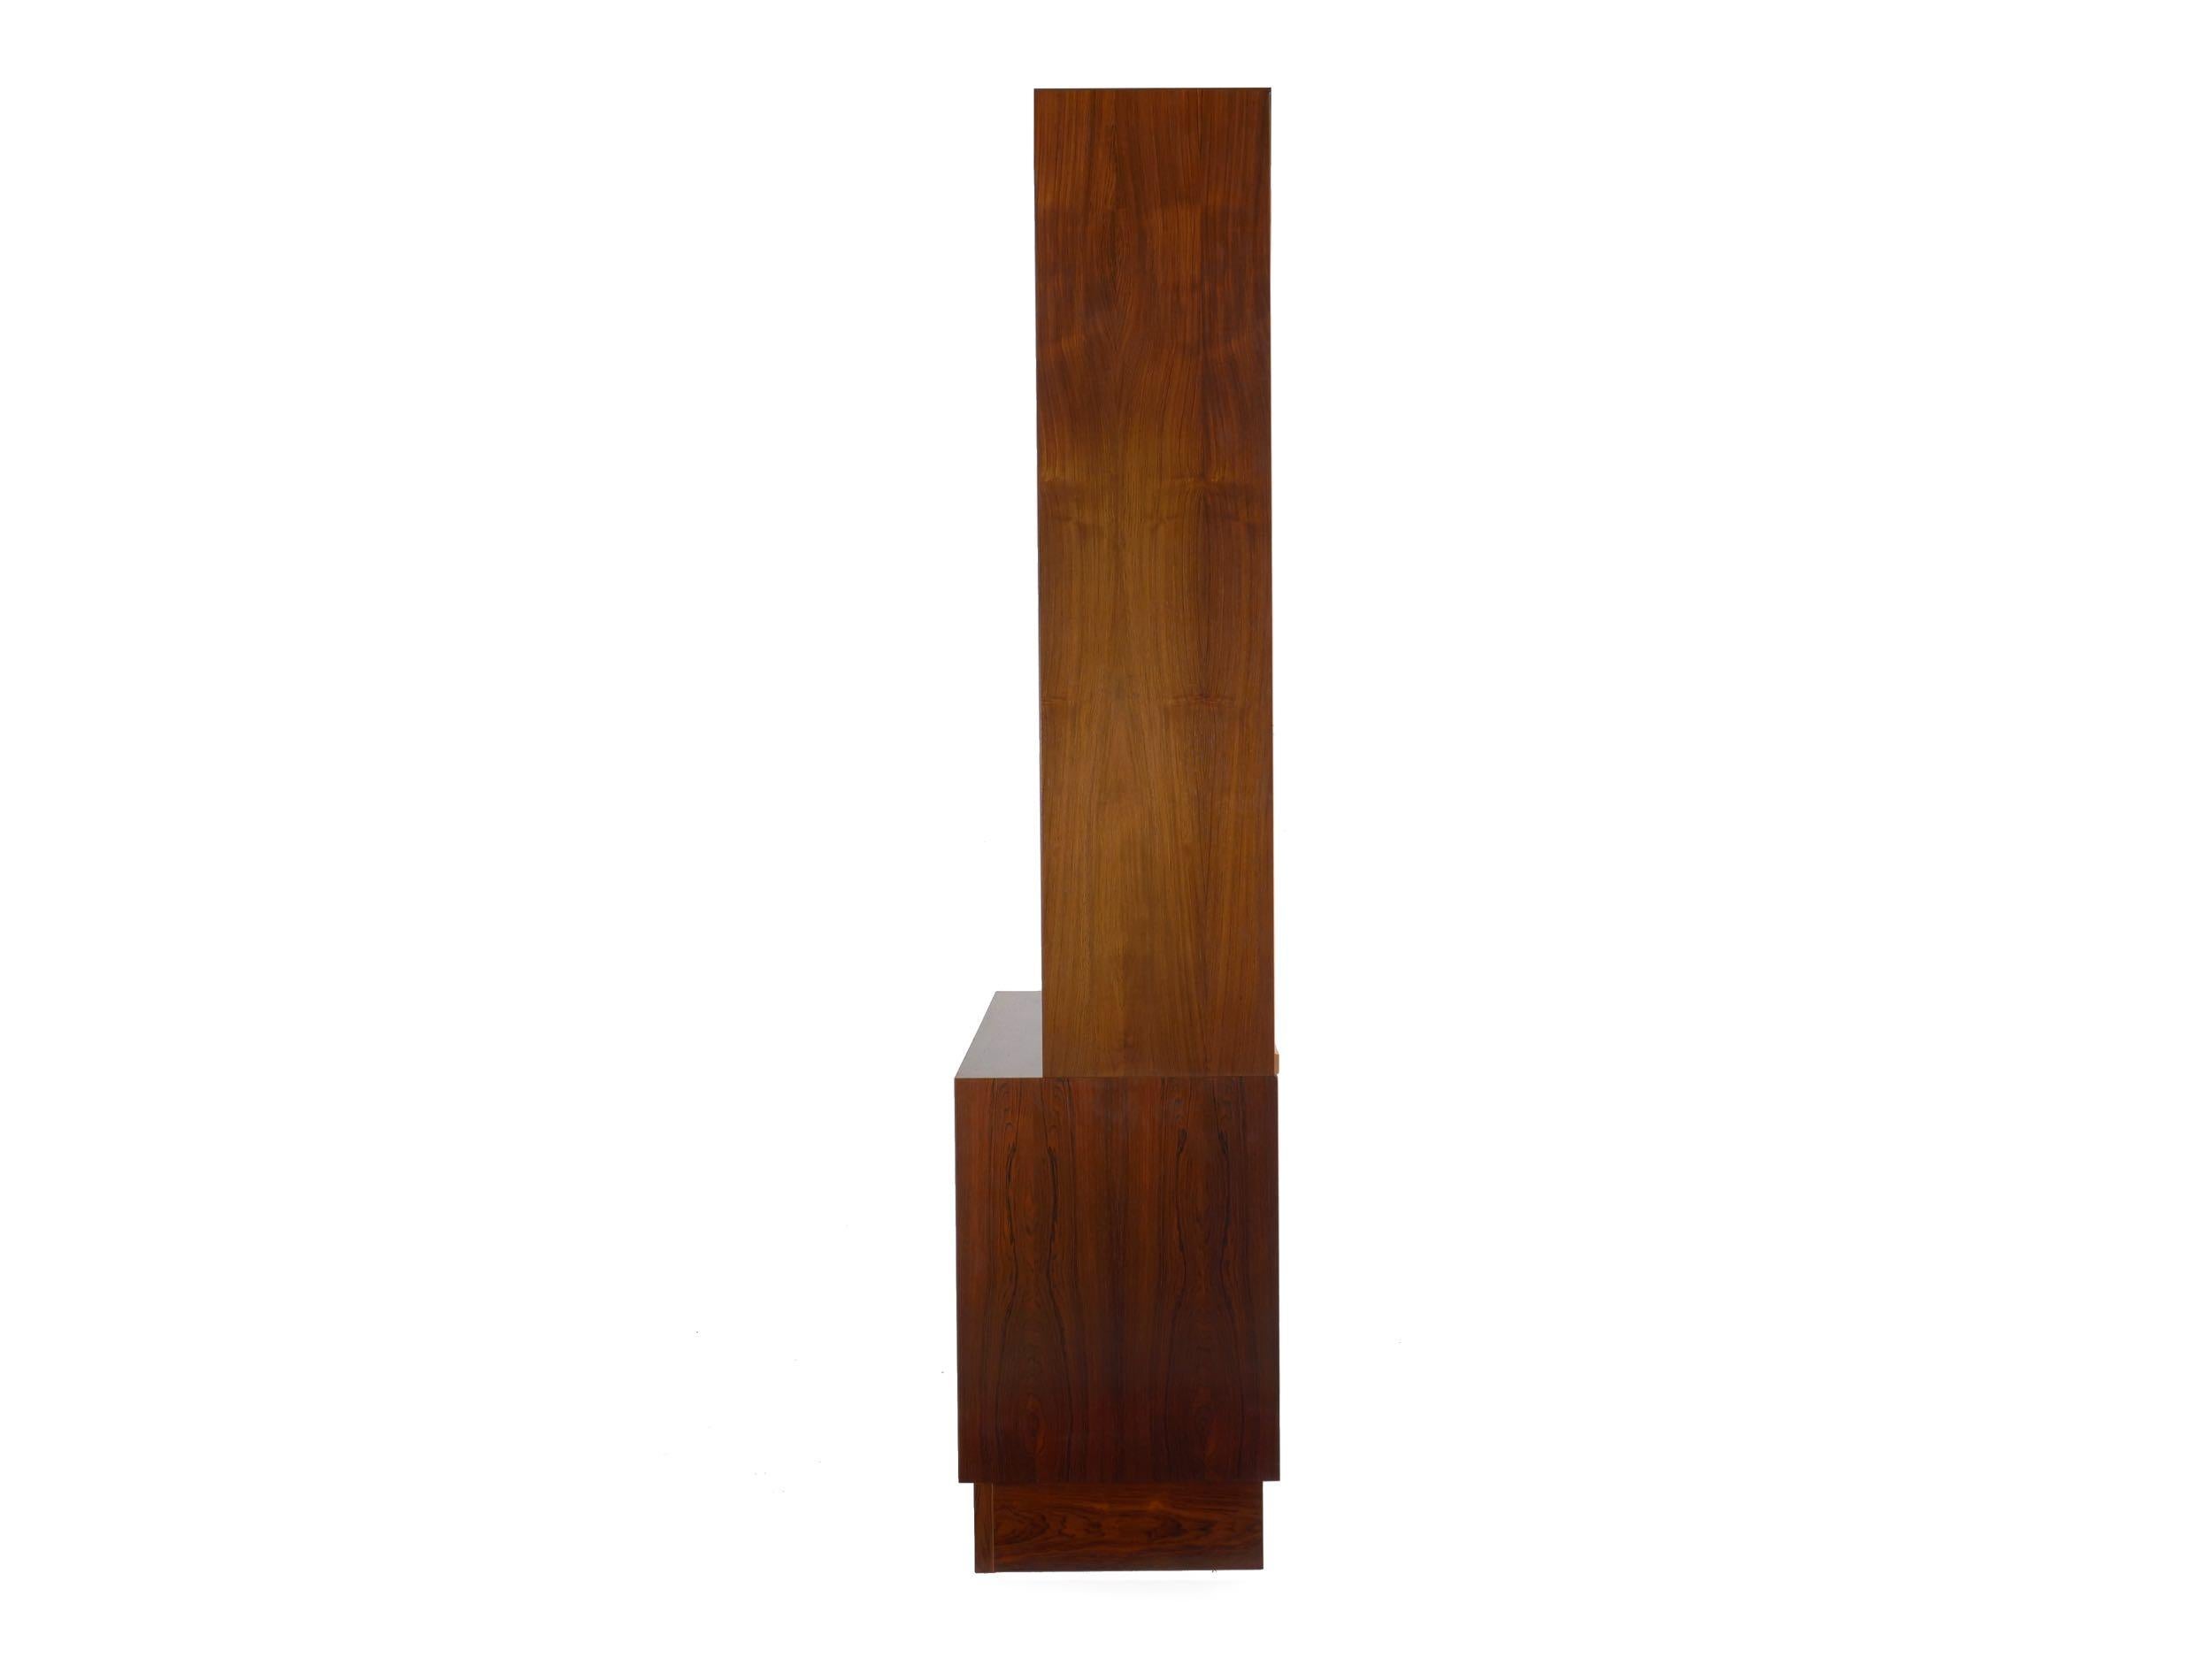 20th Century Danish Mid-Century Modern Rosewood Bookcase over Cabinet by Poul Hundevad